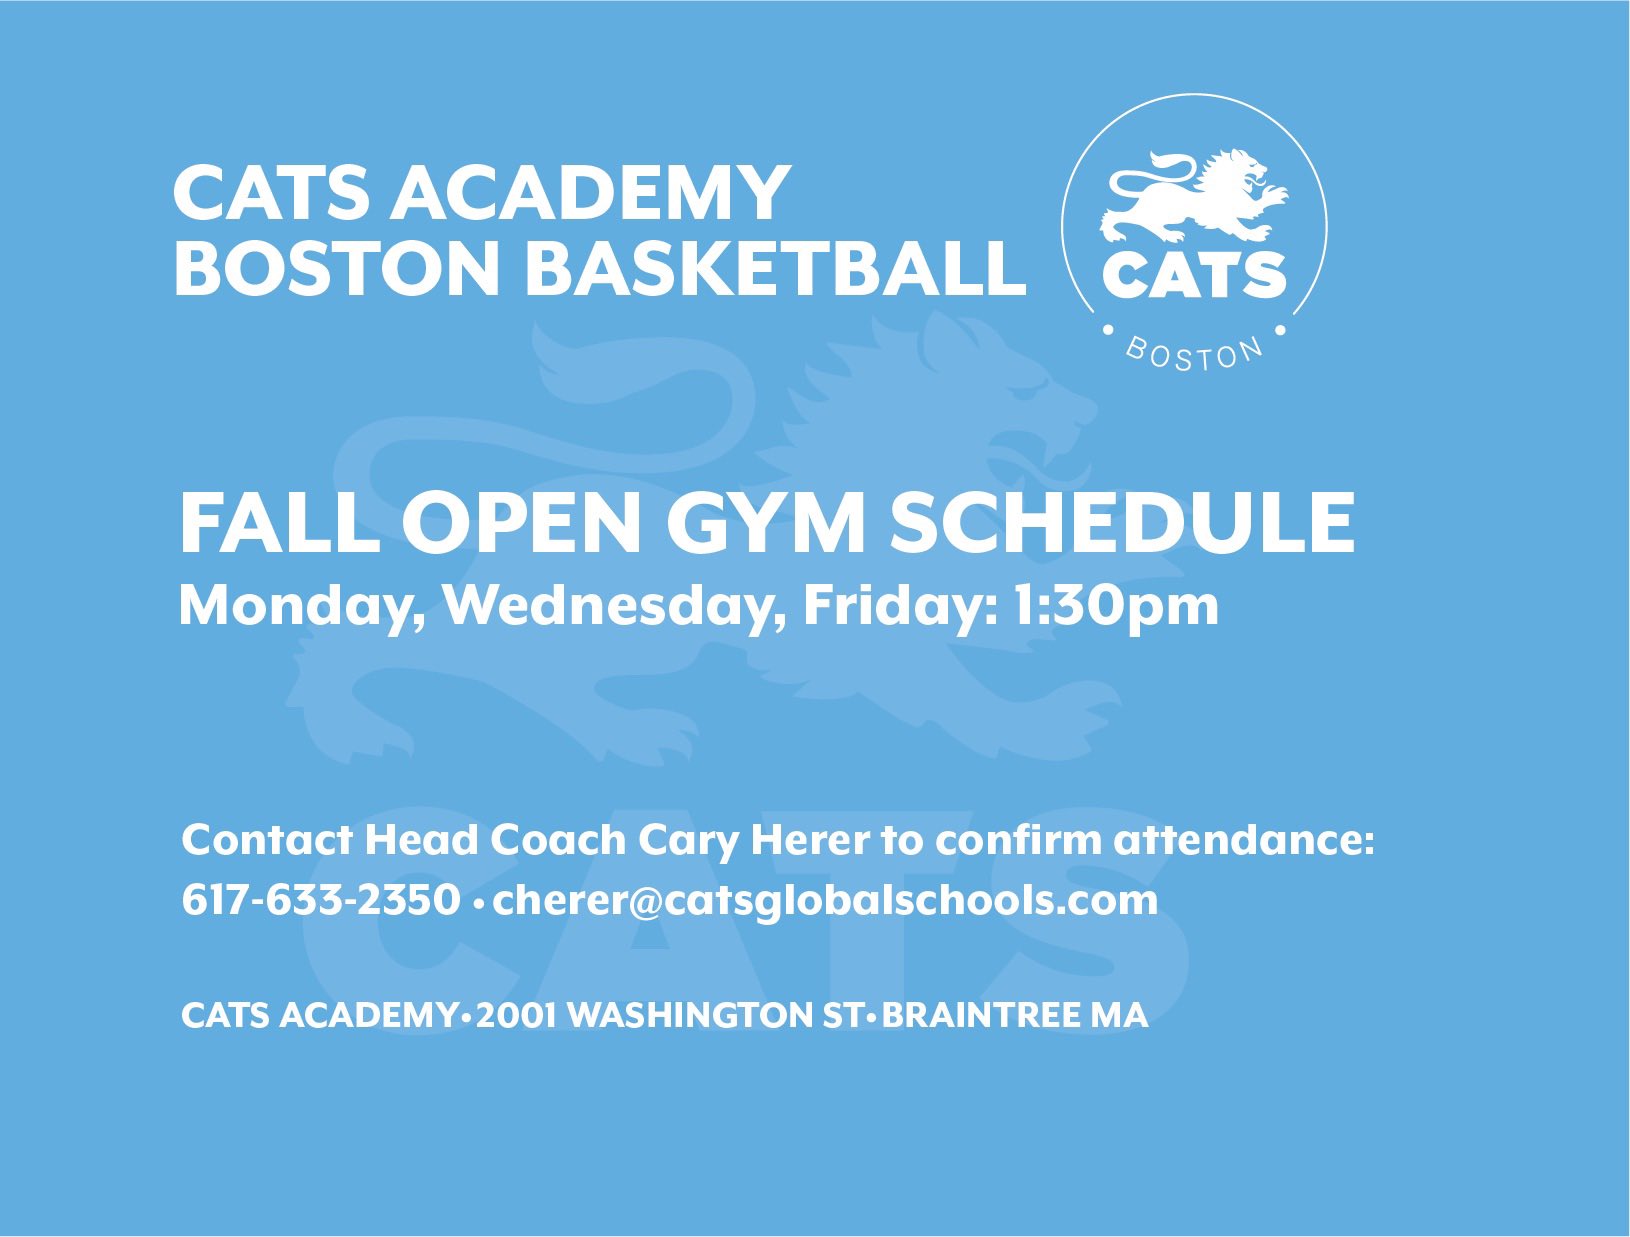 Our Campus here at CATS Academy Boston